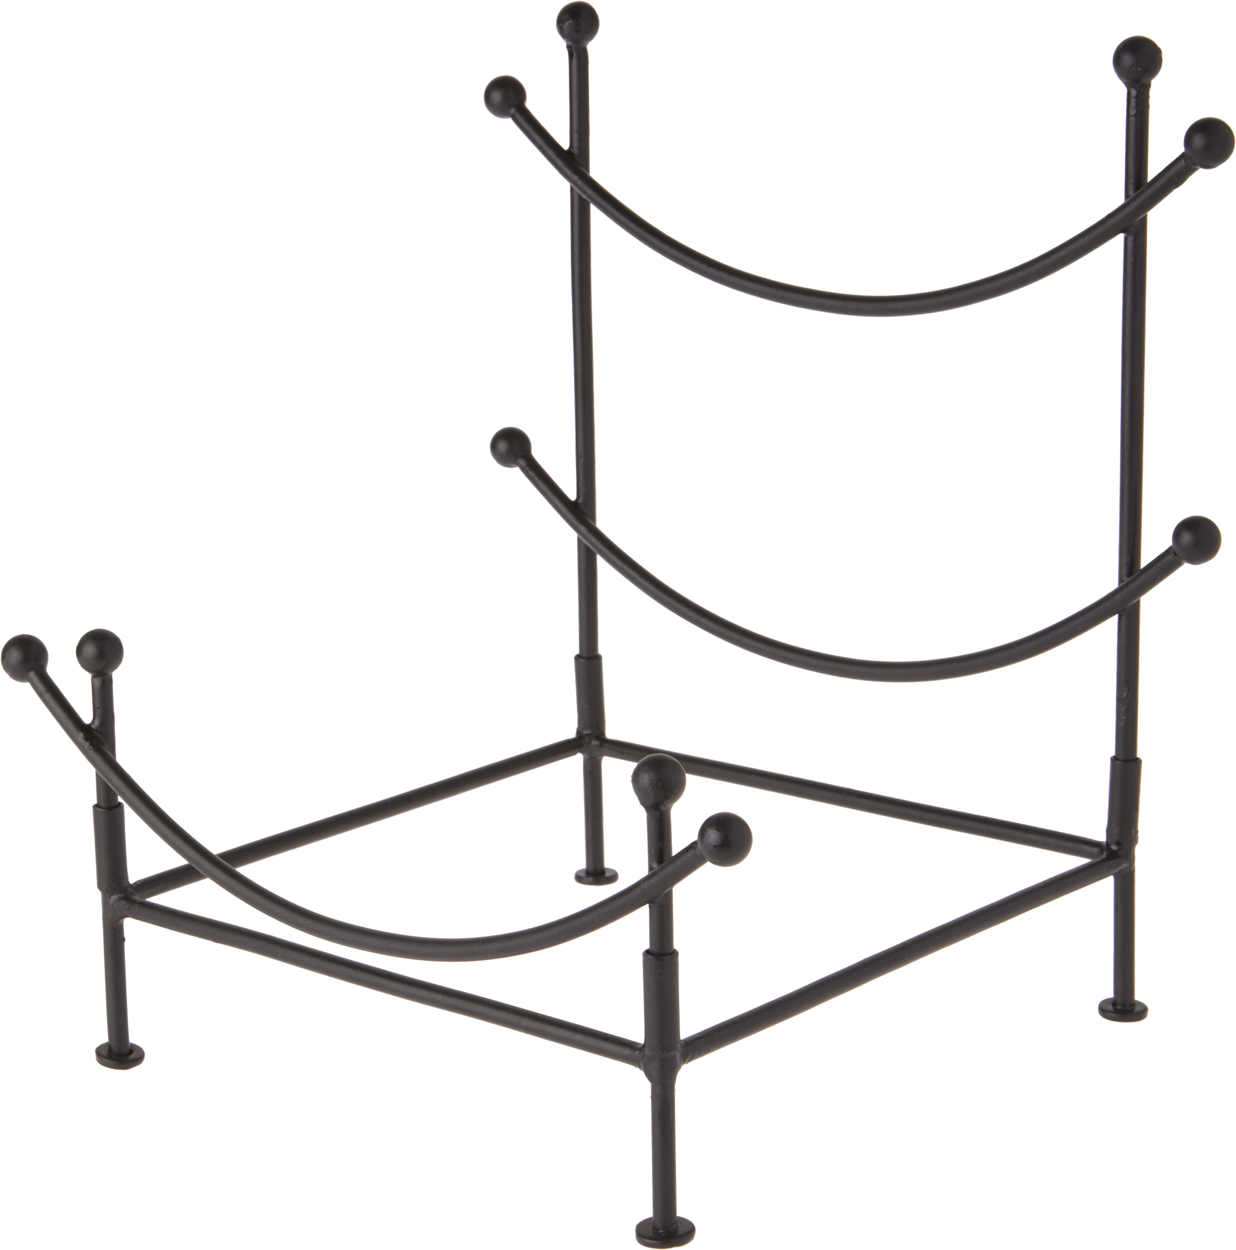 Bard's Black Wrought Iron Bowl or Deep Platter Stand, 11.5" H x 10.5" W x 8" D